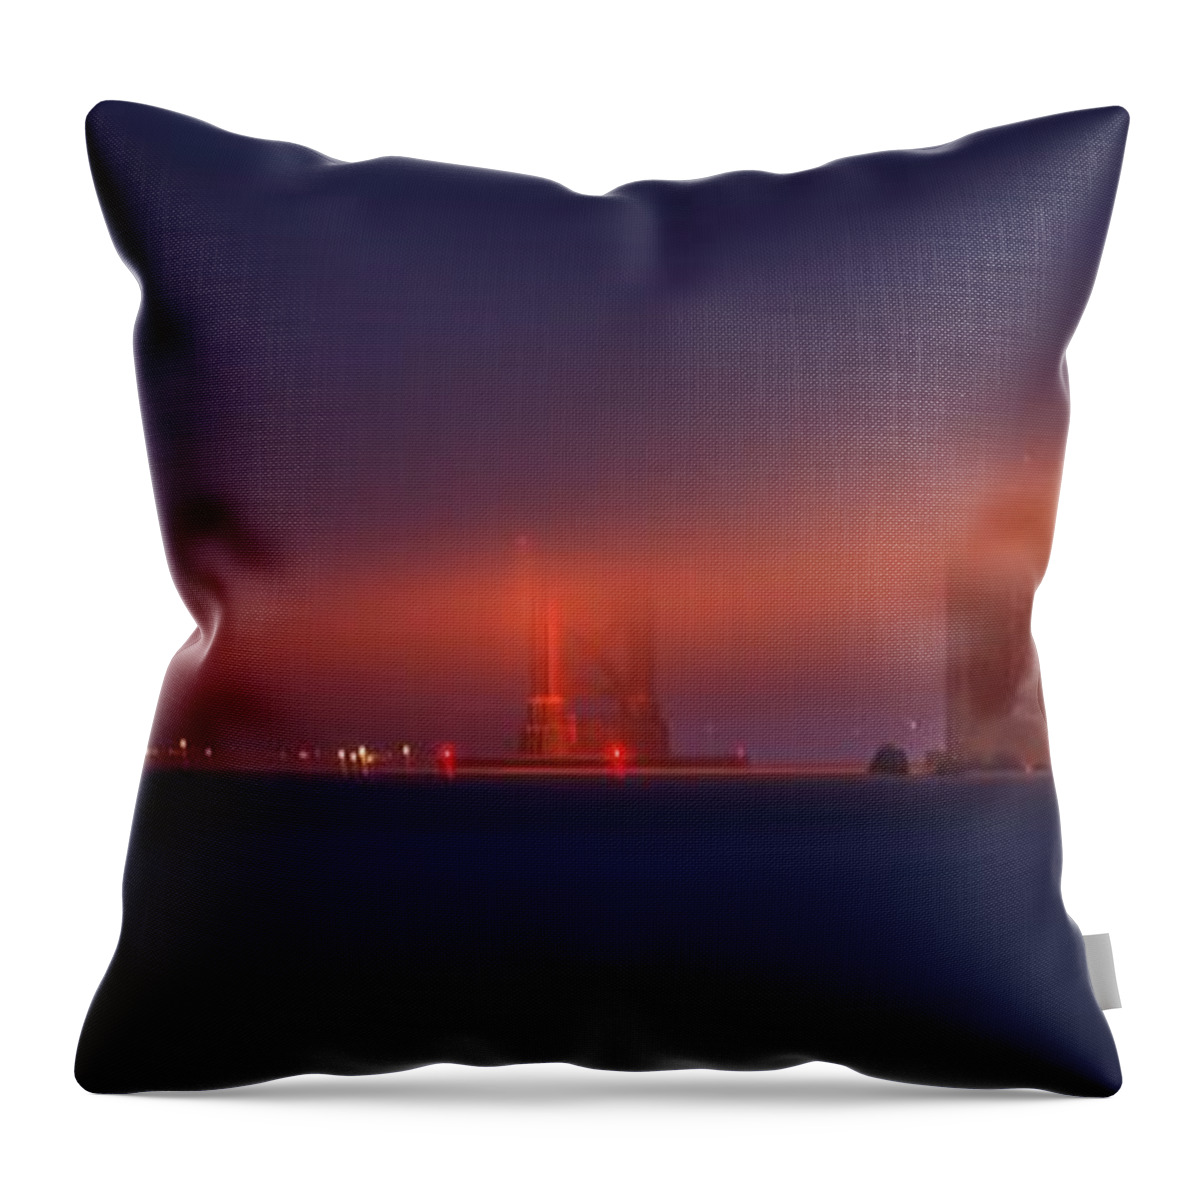 Golden Gate Bridge Throw Pillow featuring the photograph All upon a foggy night by Peter Thoeny